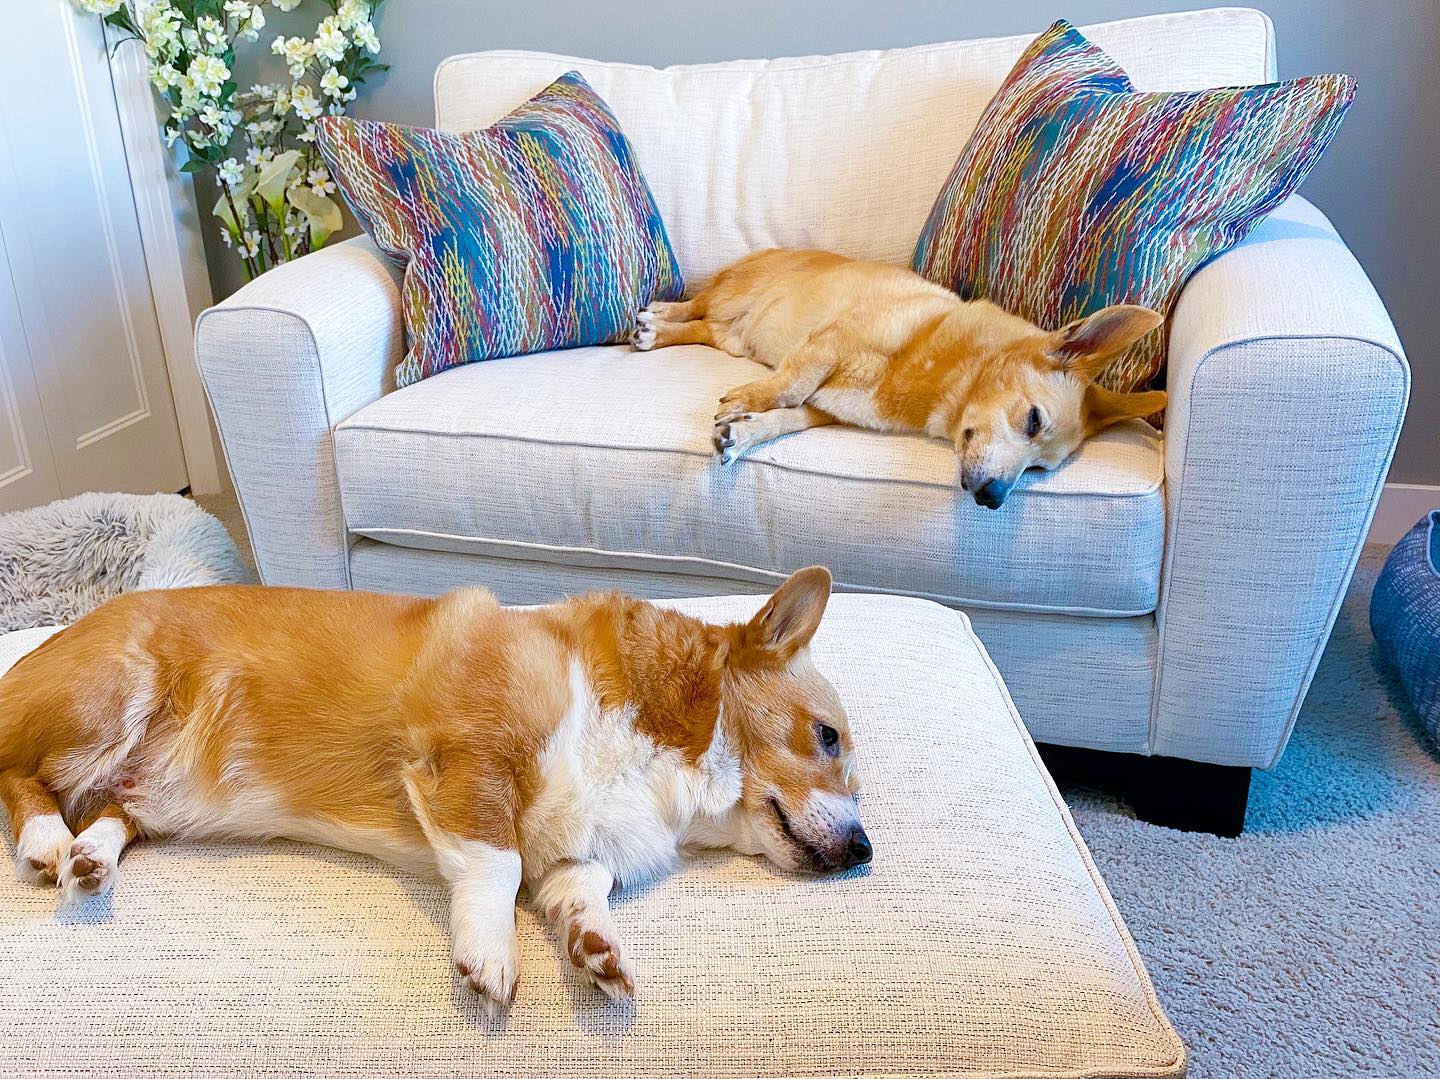 Dogs Sleeping on a White Chair and Ottoman